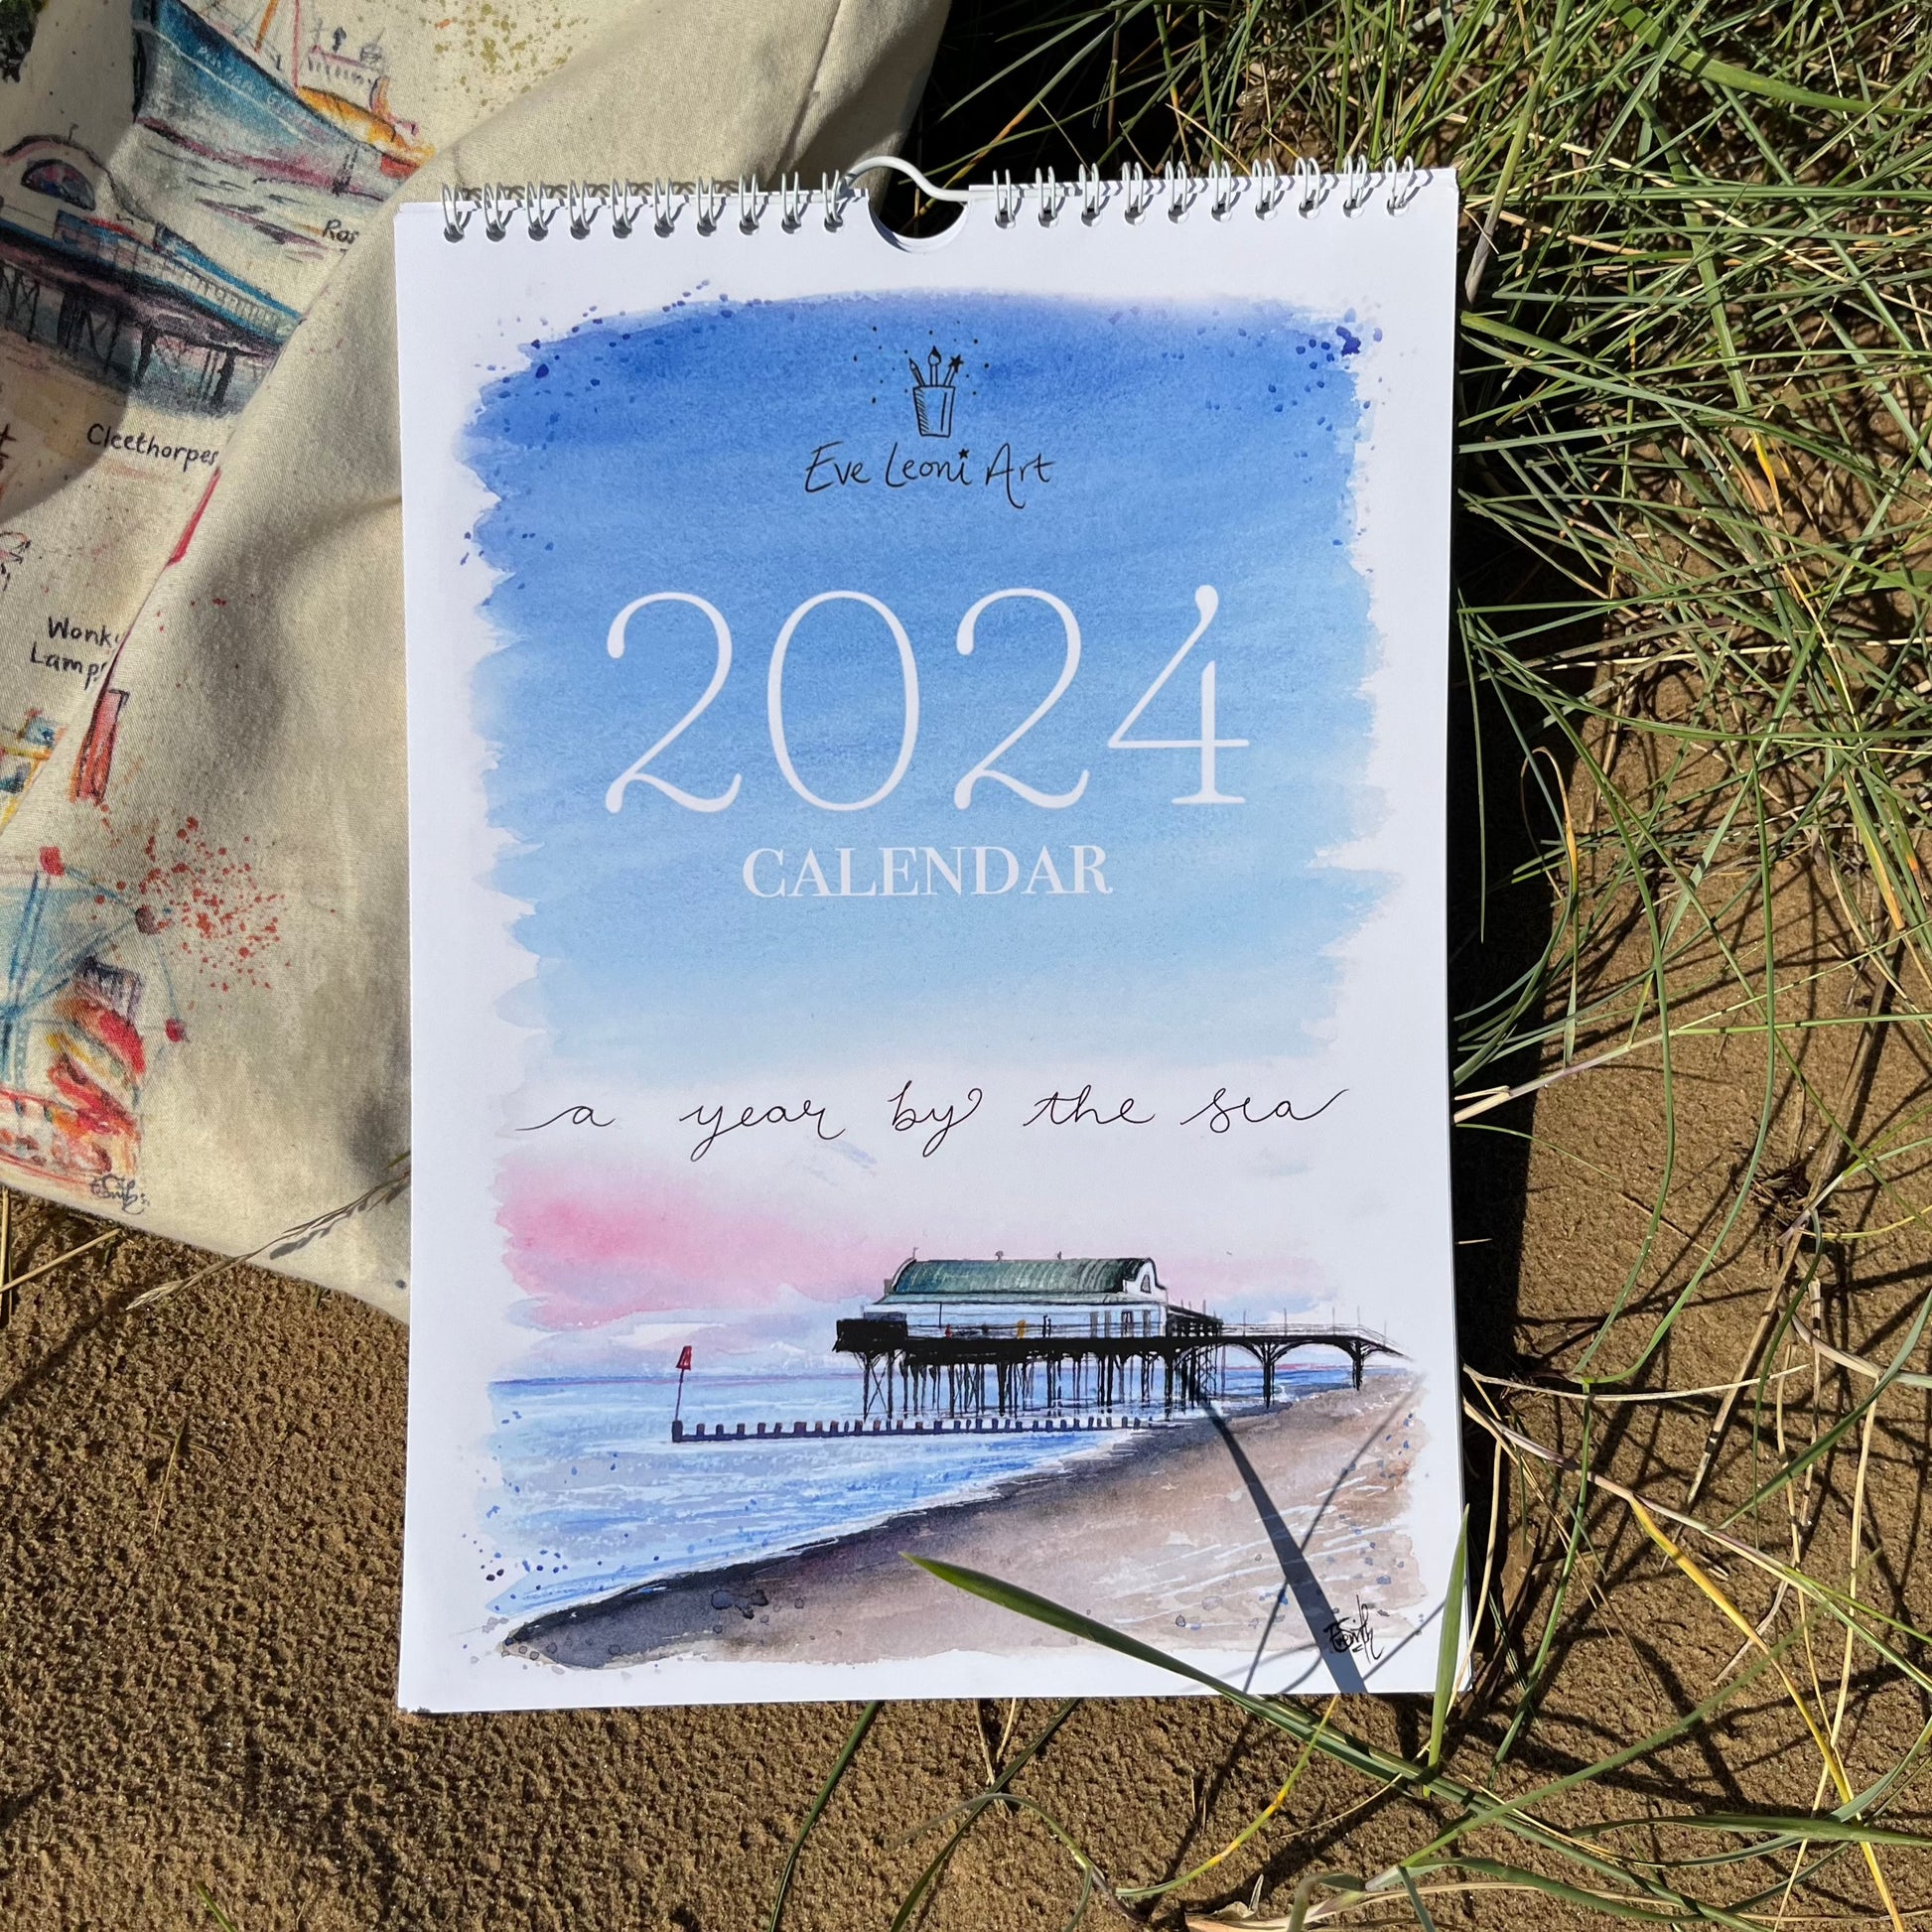 2024 Calendar featuring artwork of Cleethorpes by local watercolour artist, Eve Leoni Art.